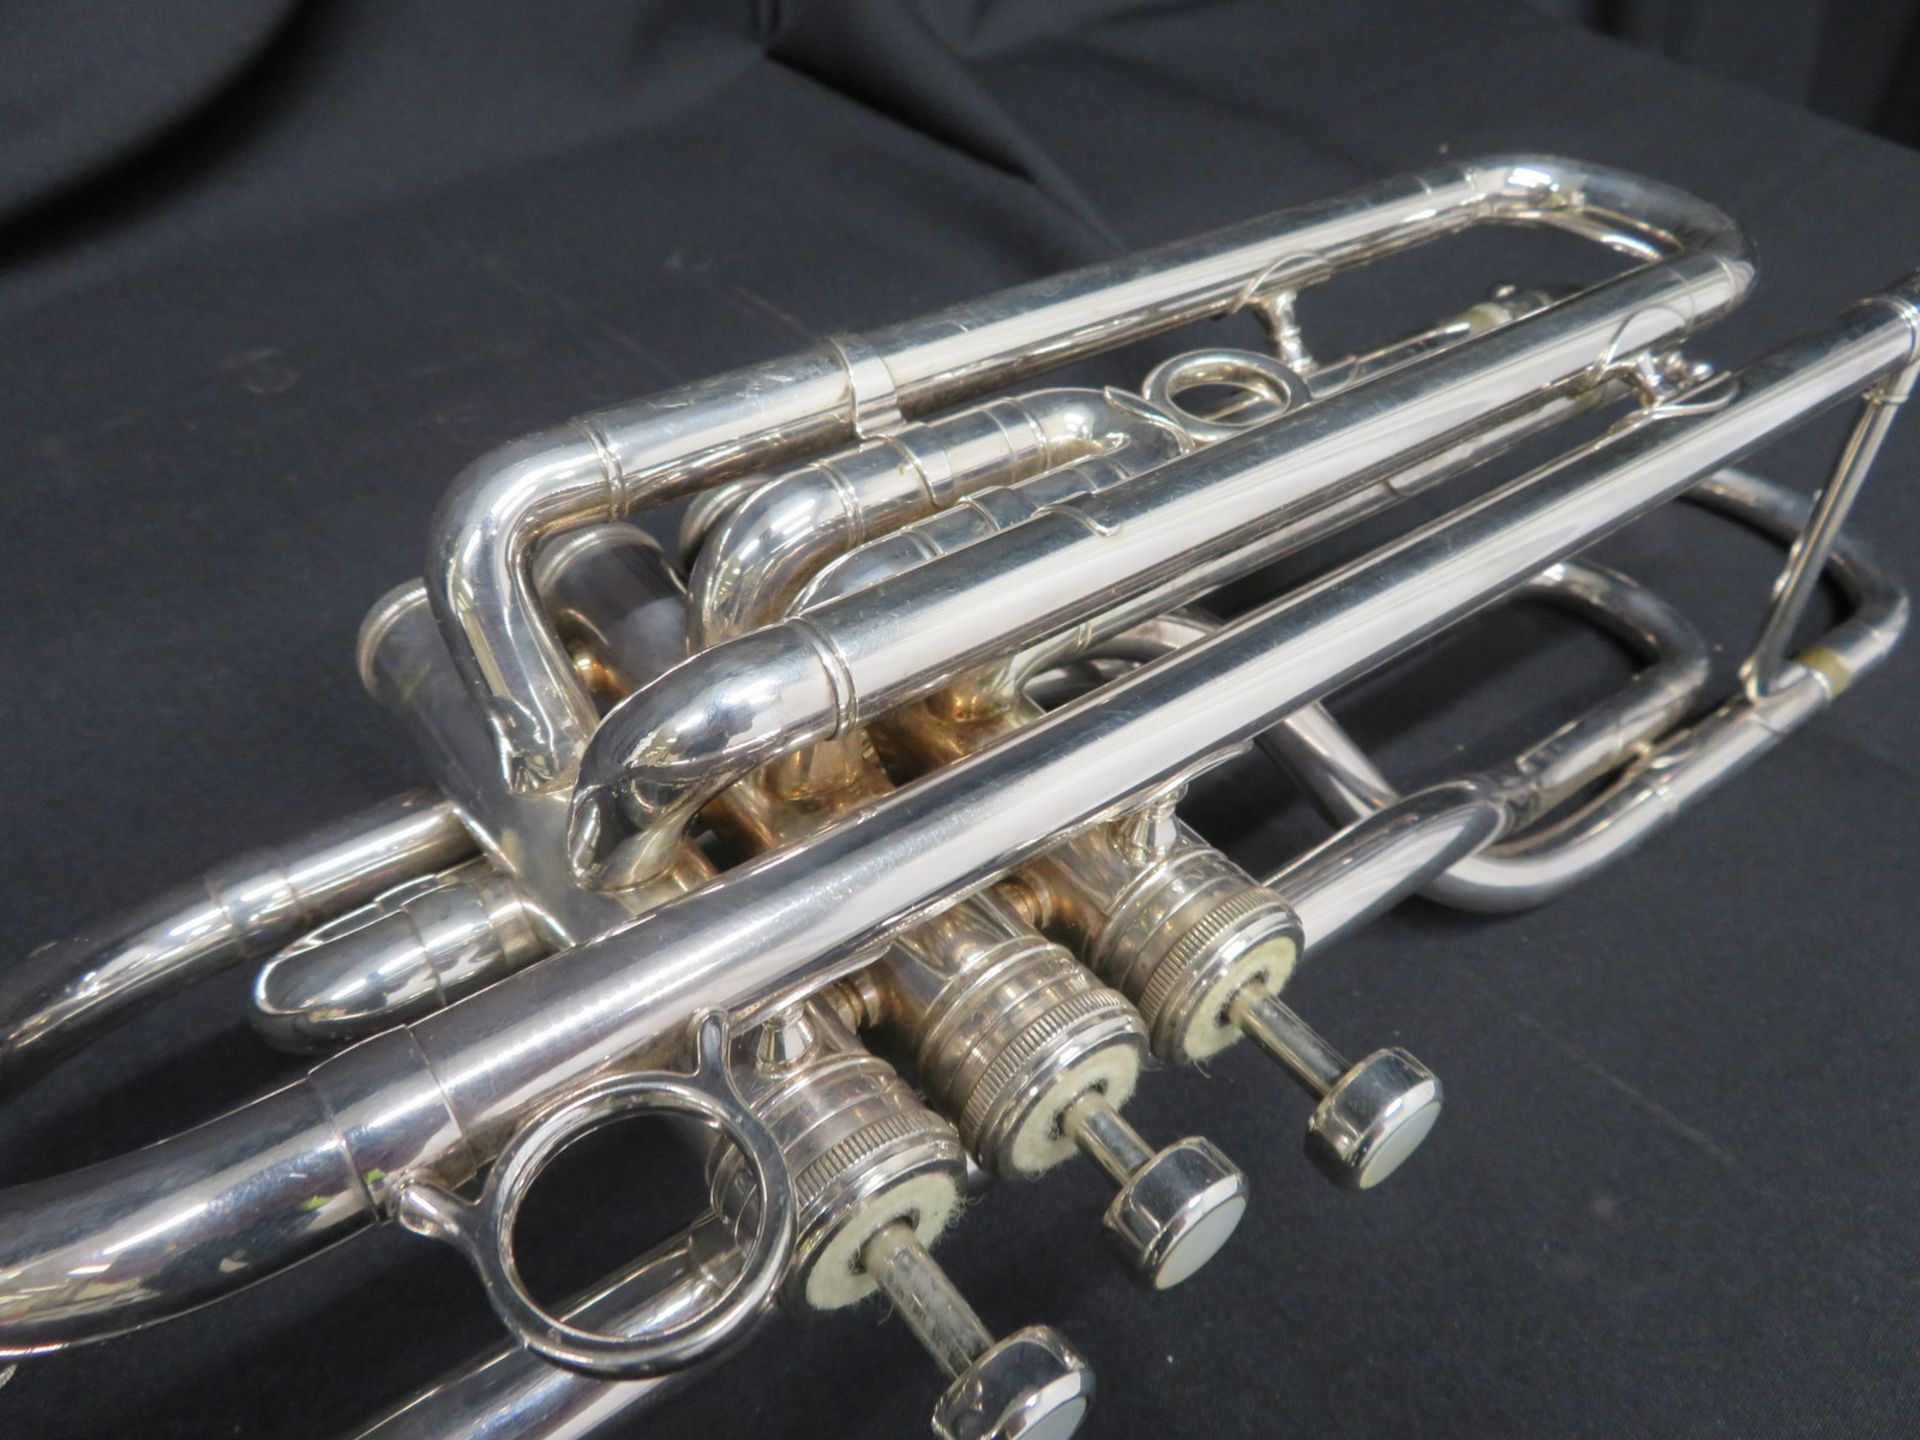 Boosey & Hawkes Besson 700 London tenor fanfare trumpet with case. Serial number: 707-721126. - Image 15 of 18